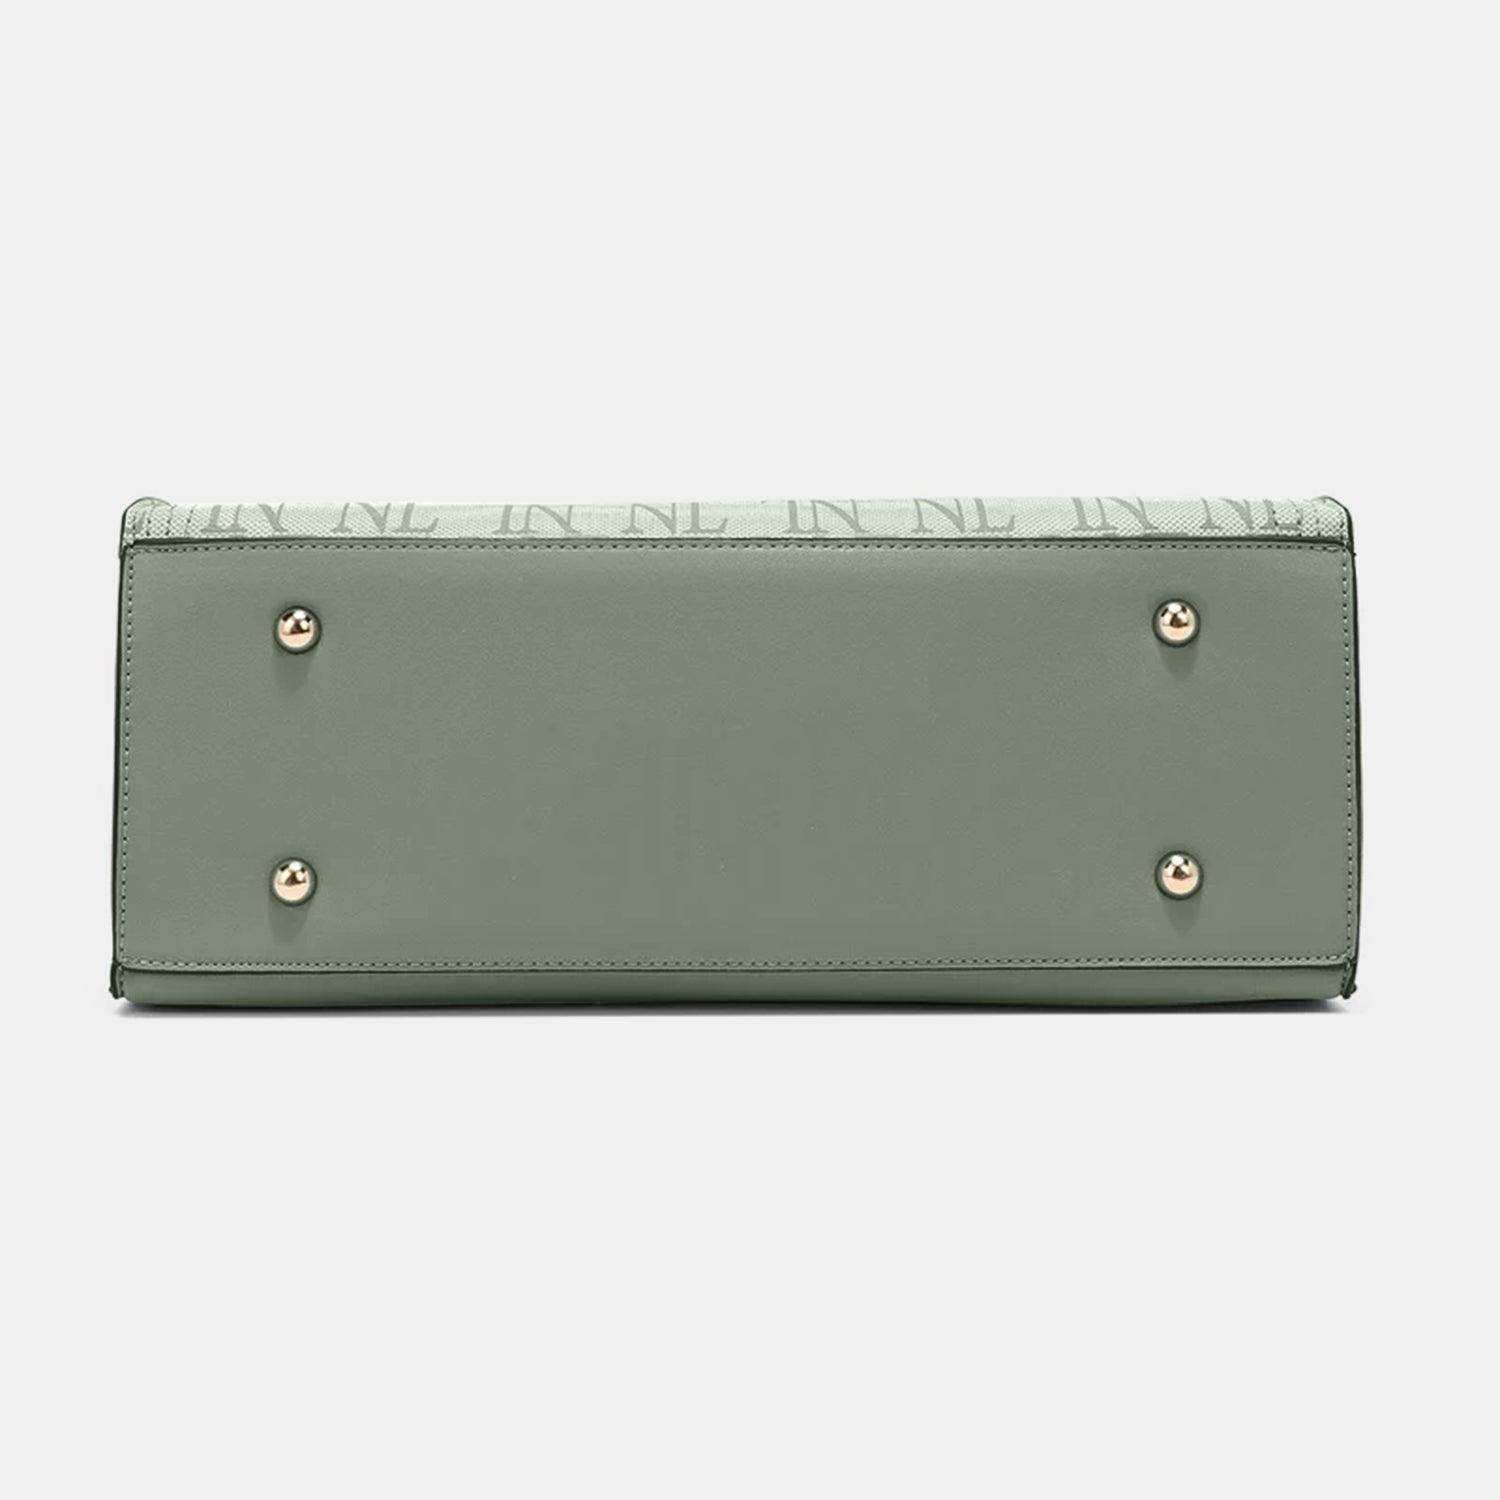 a women's wallet with studded details on the front